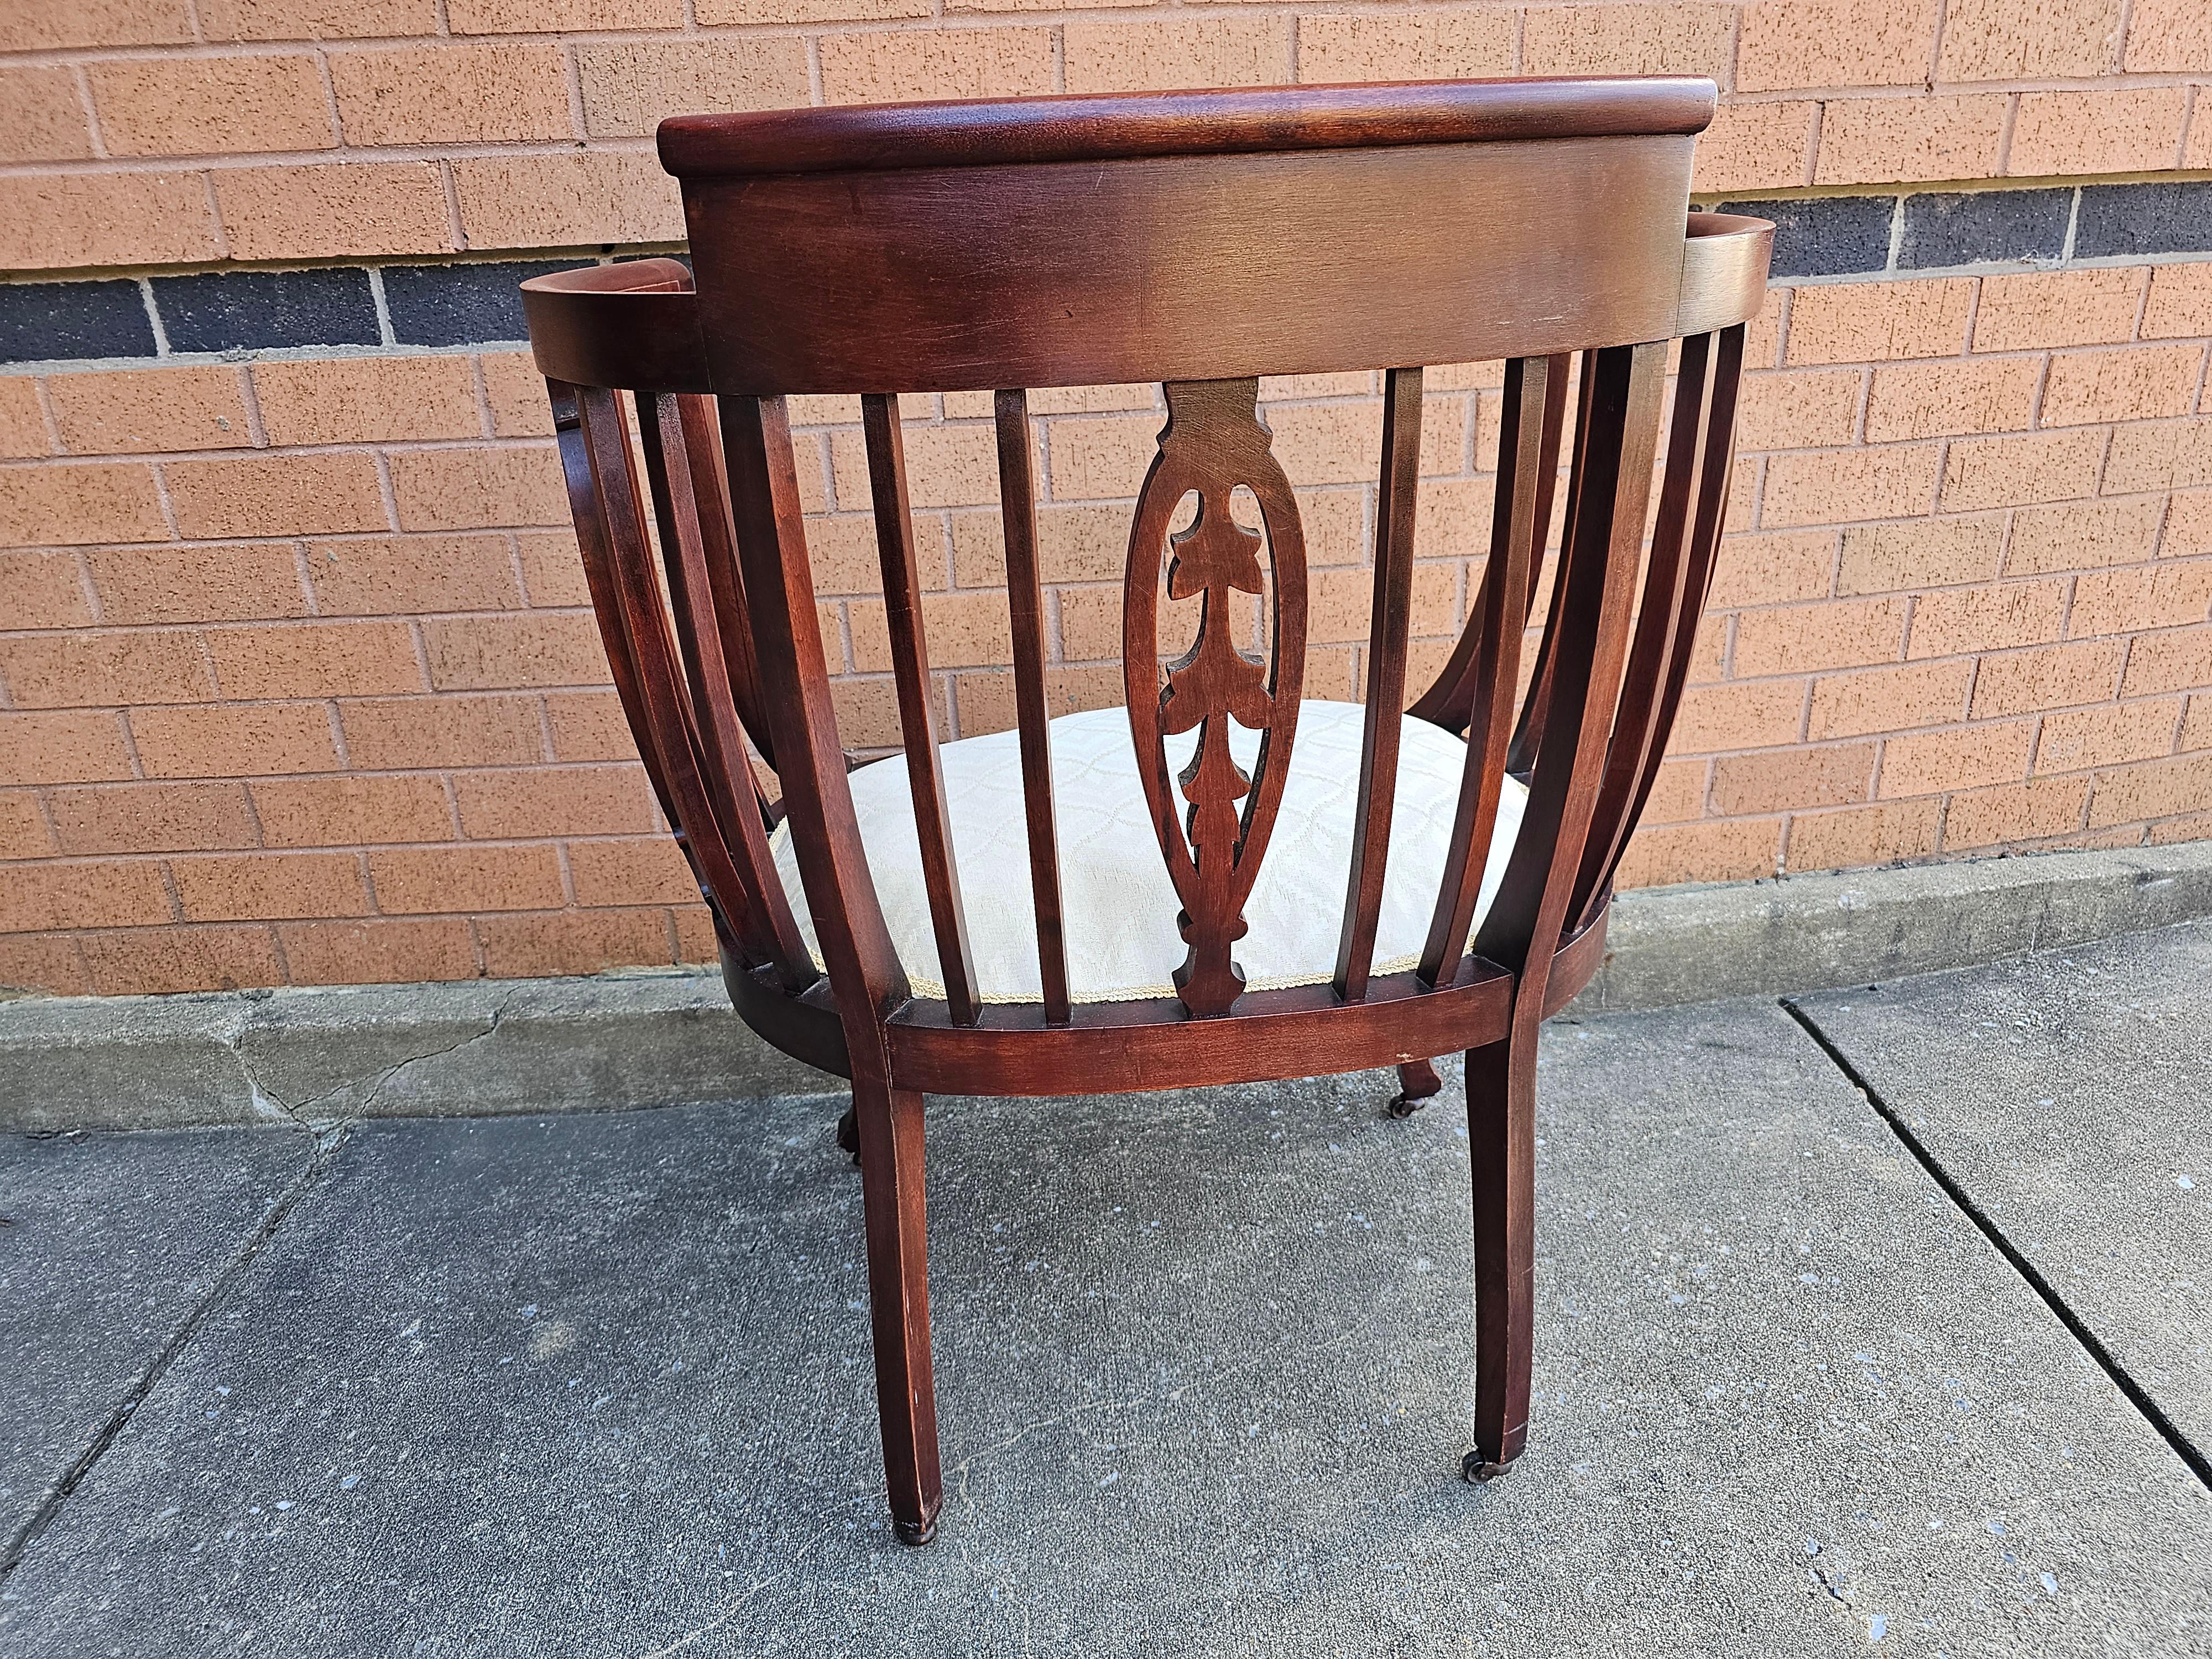 Early 20th Century Edwardian Inlaid Mahogany and Upholstered Seat Barrel Chair For Sale 1